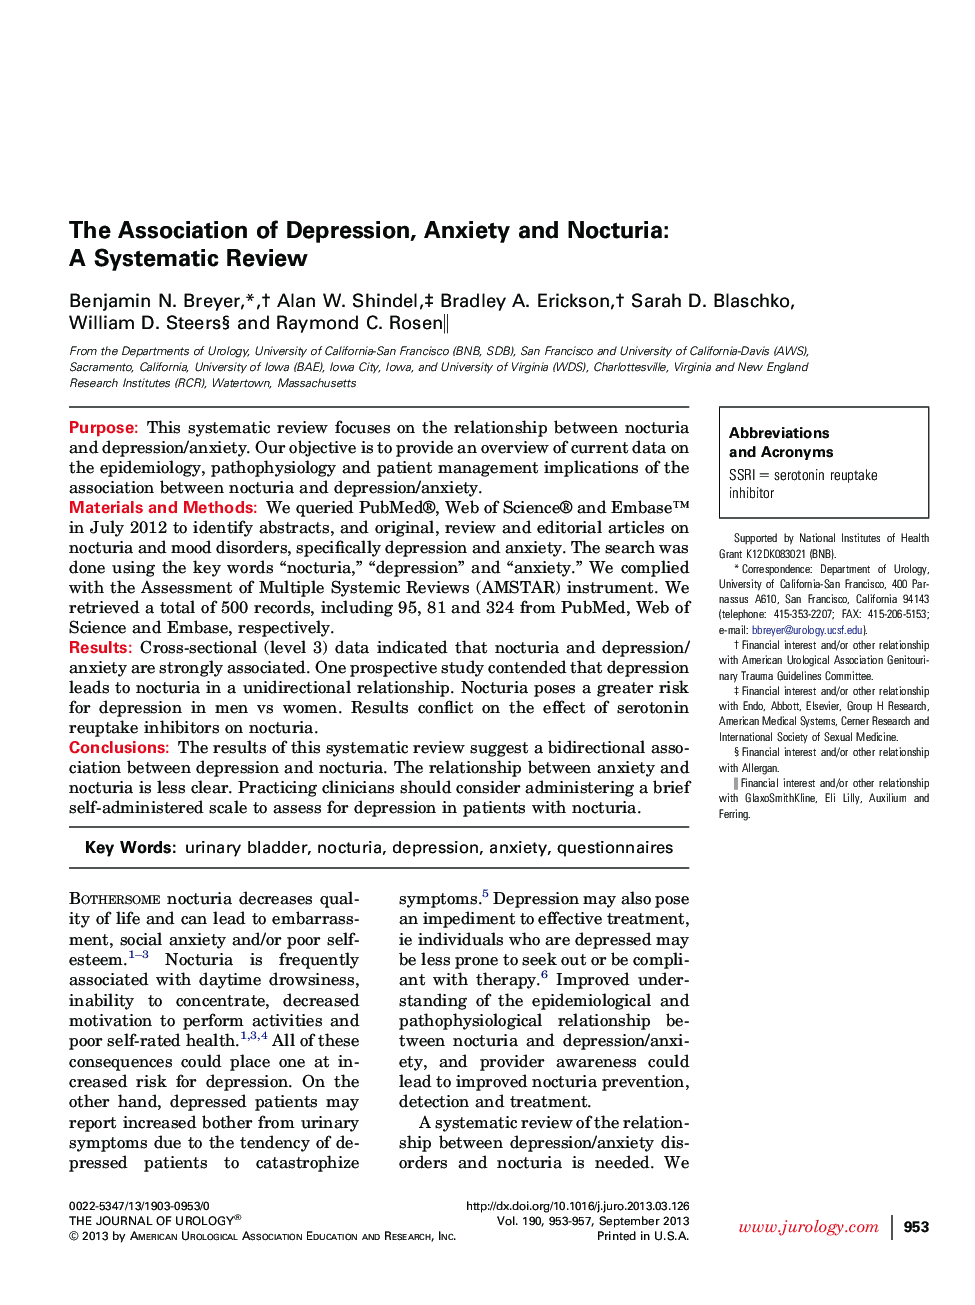 The Association of Depression, Anxiety and Nocturia: A Systematic Review 